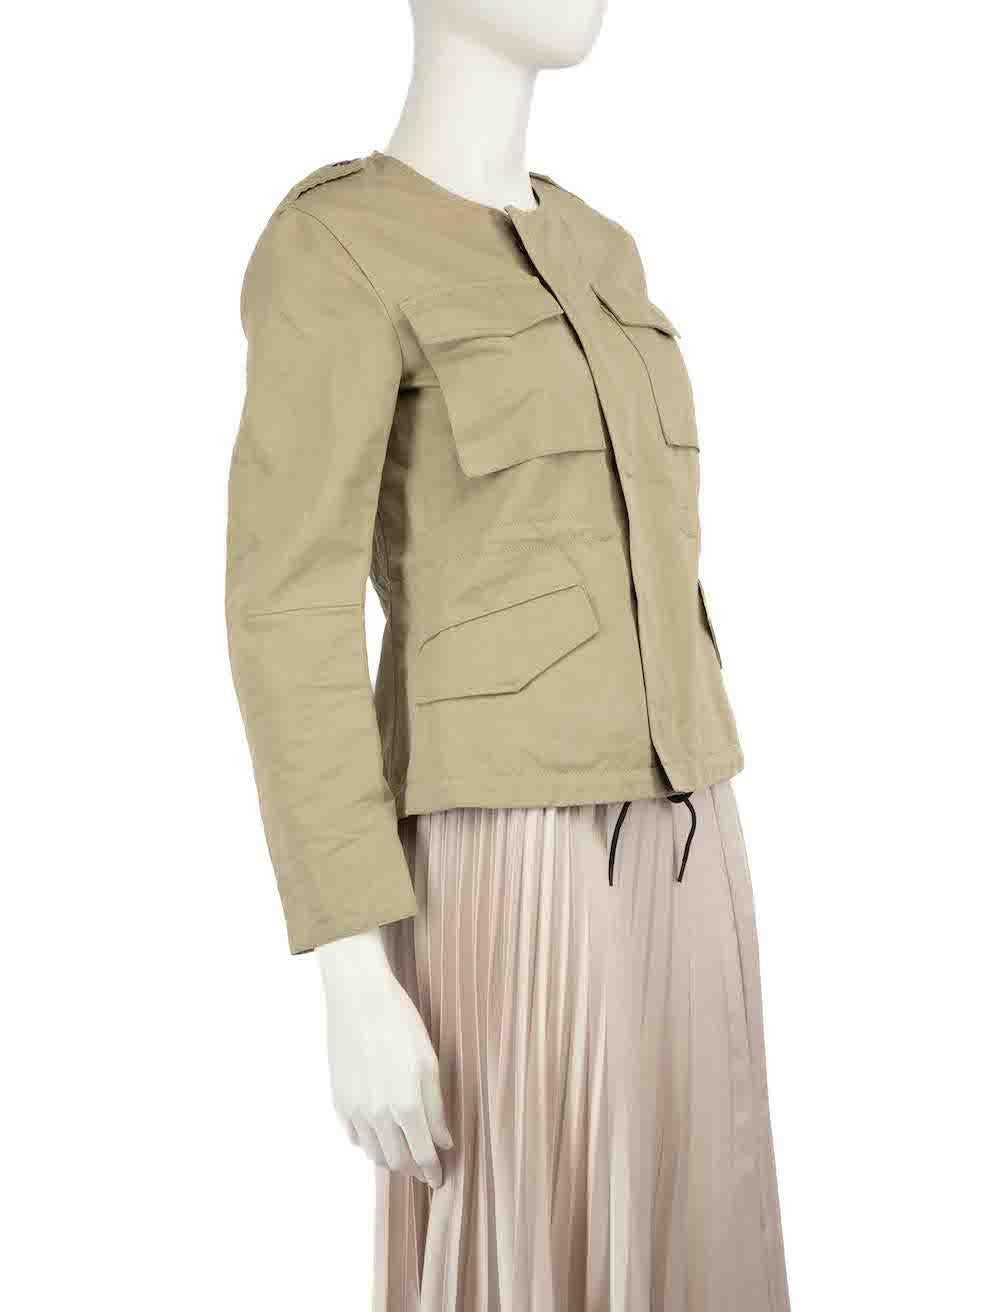 CONDITION is Good. General wear to jacket is evident. Moderate signs of wear to the front, back and sleeves with discoloured marks. The button placket lining also has small holes on this used Maison Kitsuné designer resale item.
 
 Details
 Khaki
